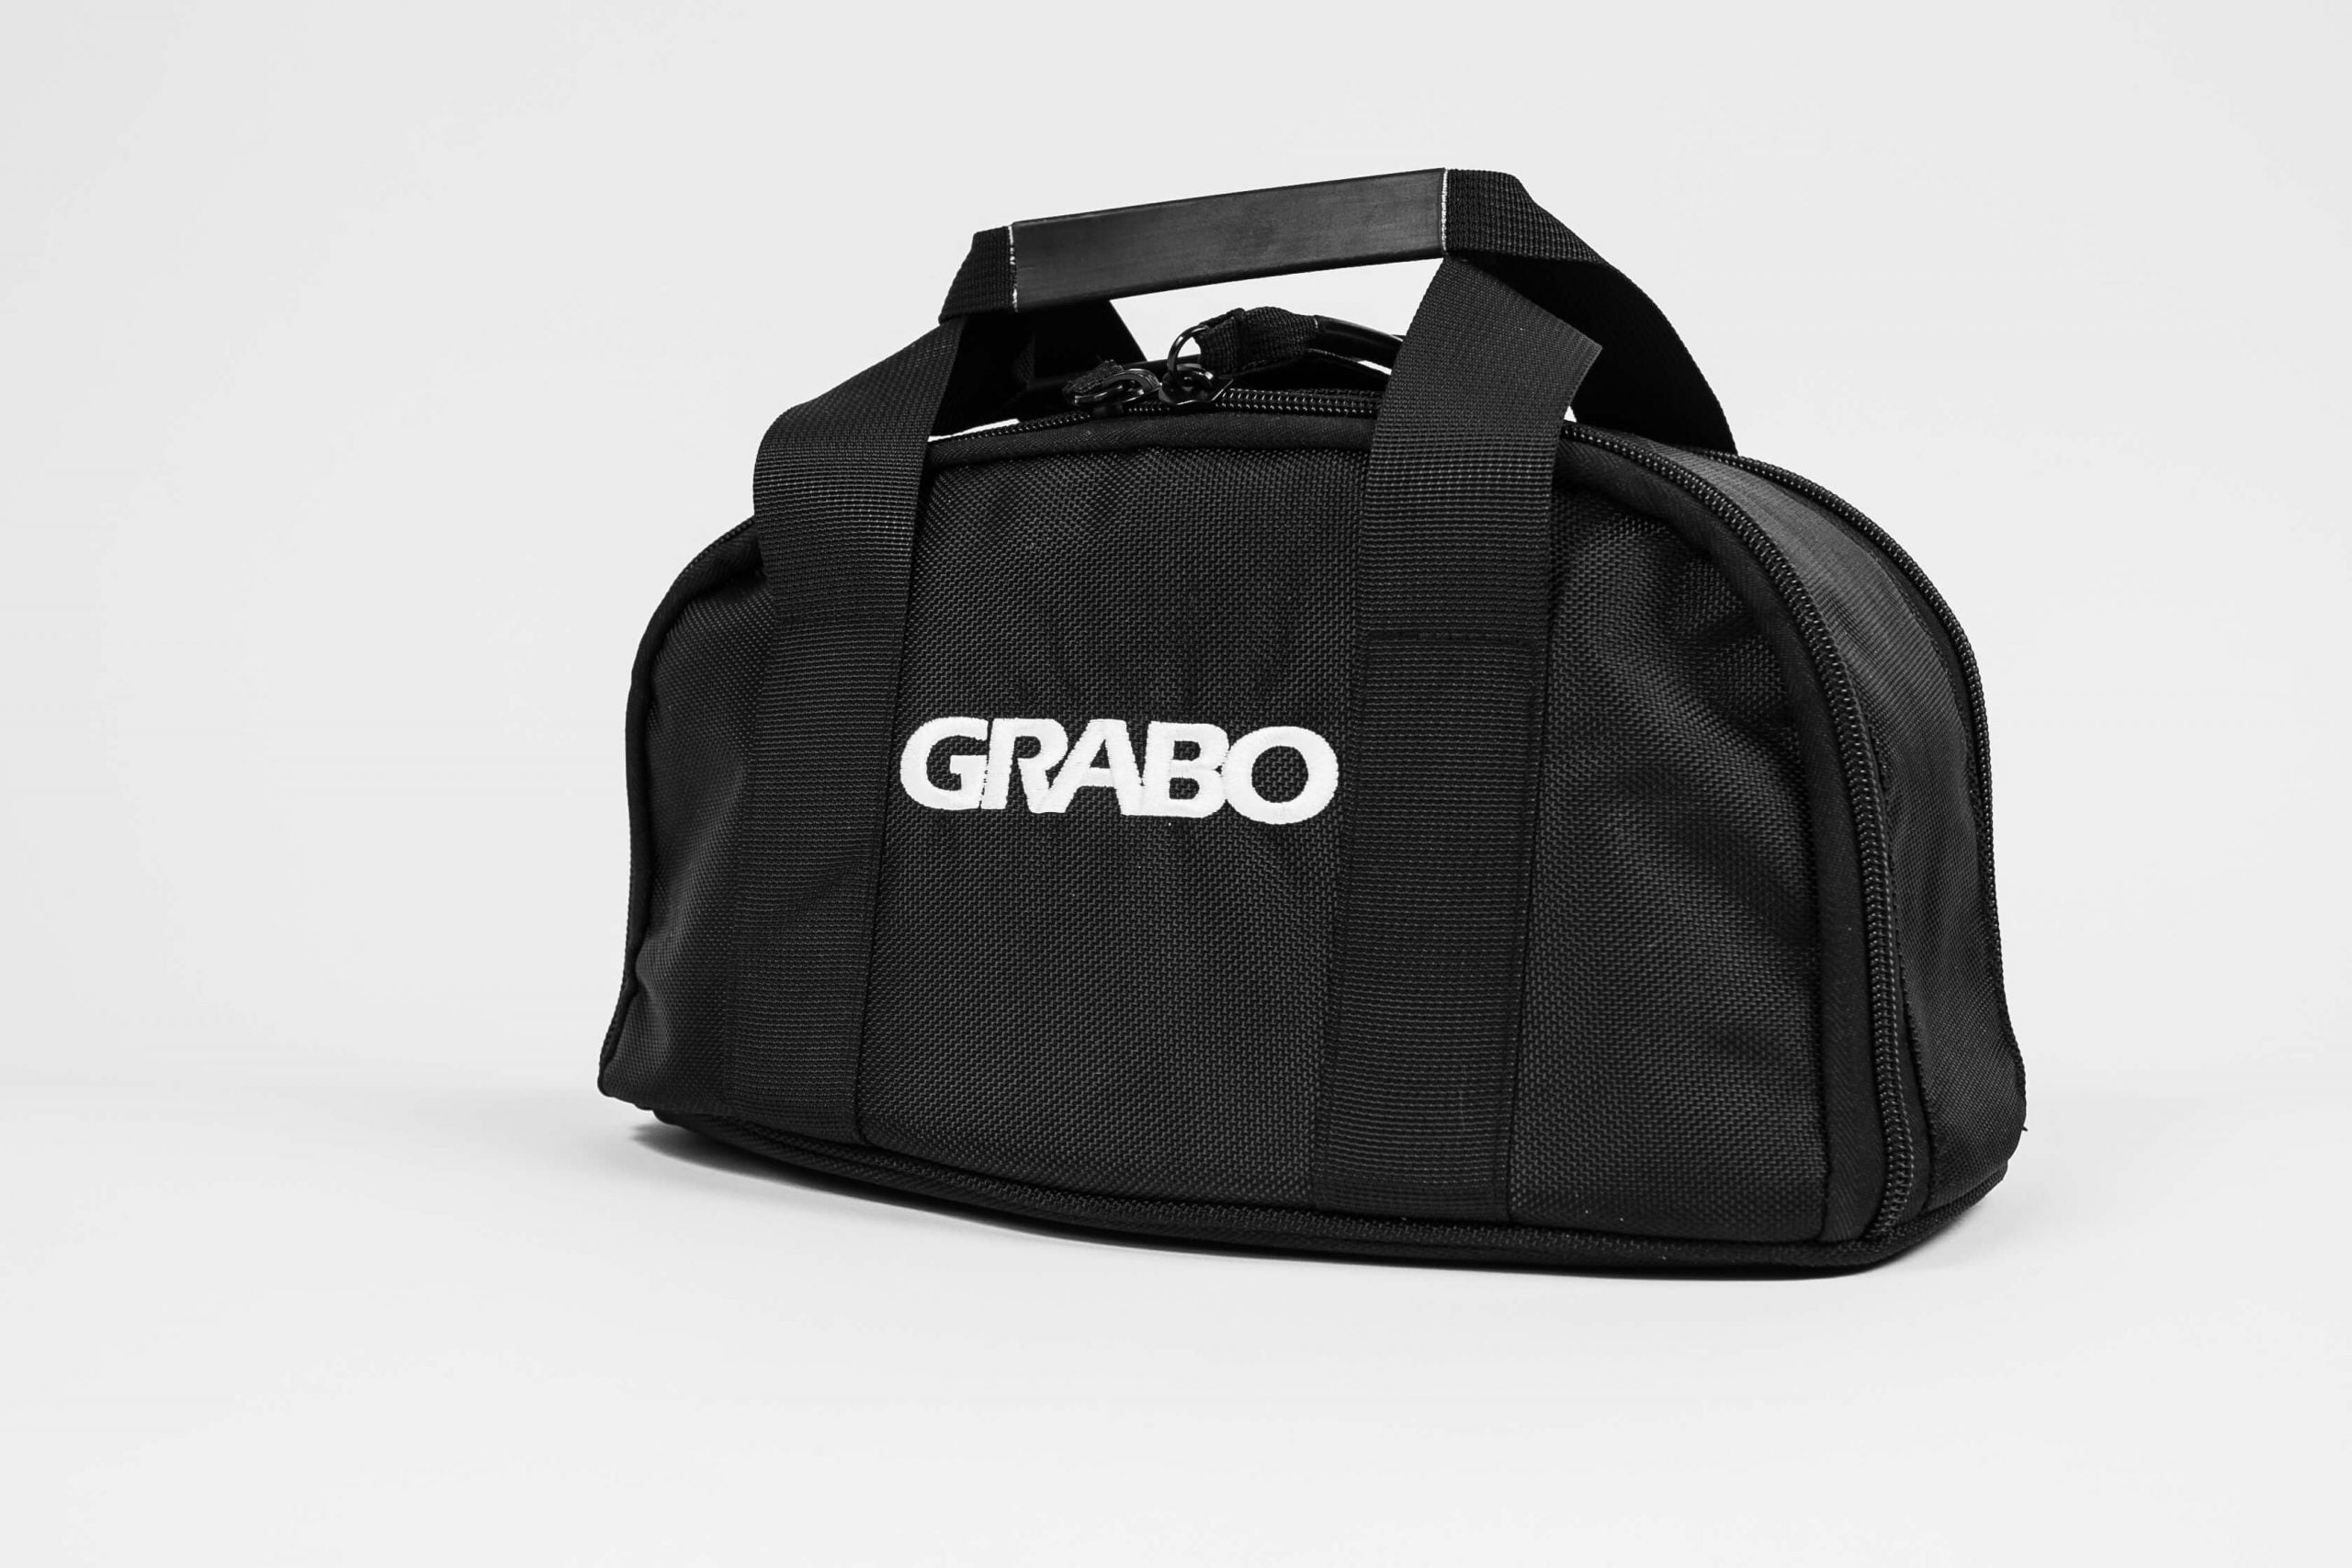 Nemo GRABO Classic - The electric suction cup - GRABO Carrying Bag